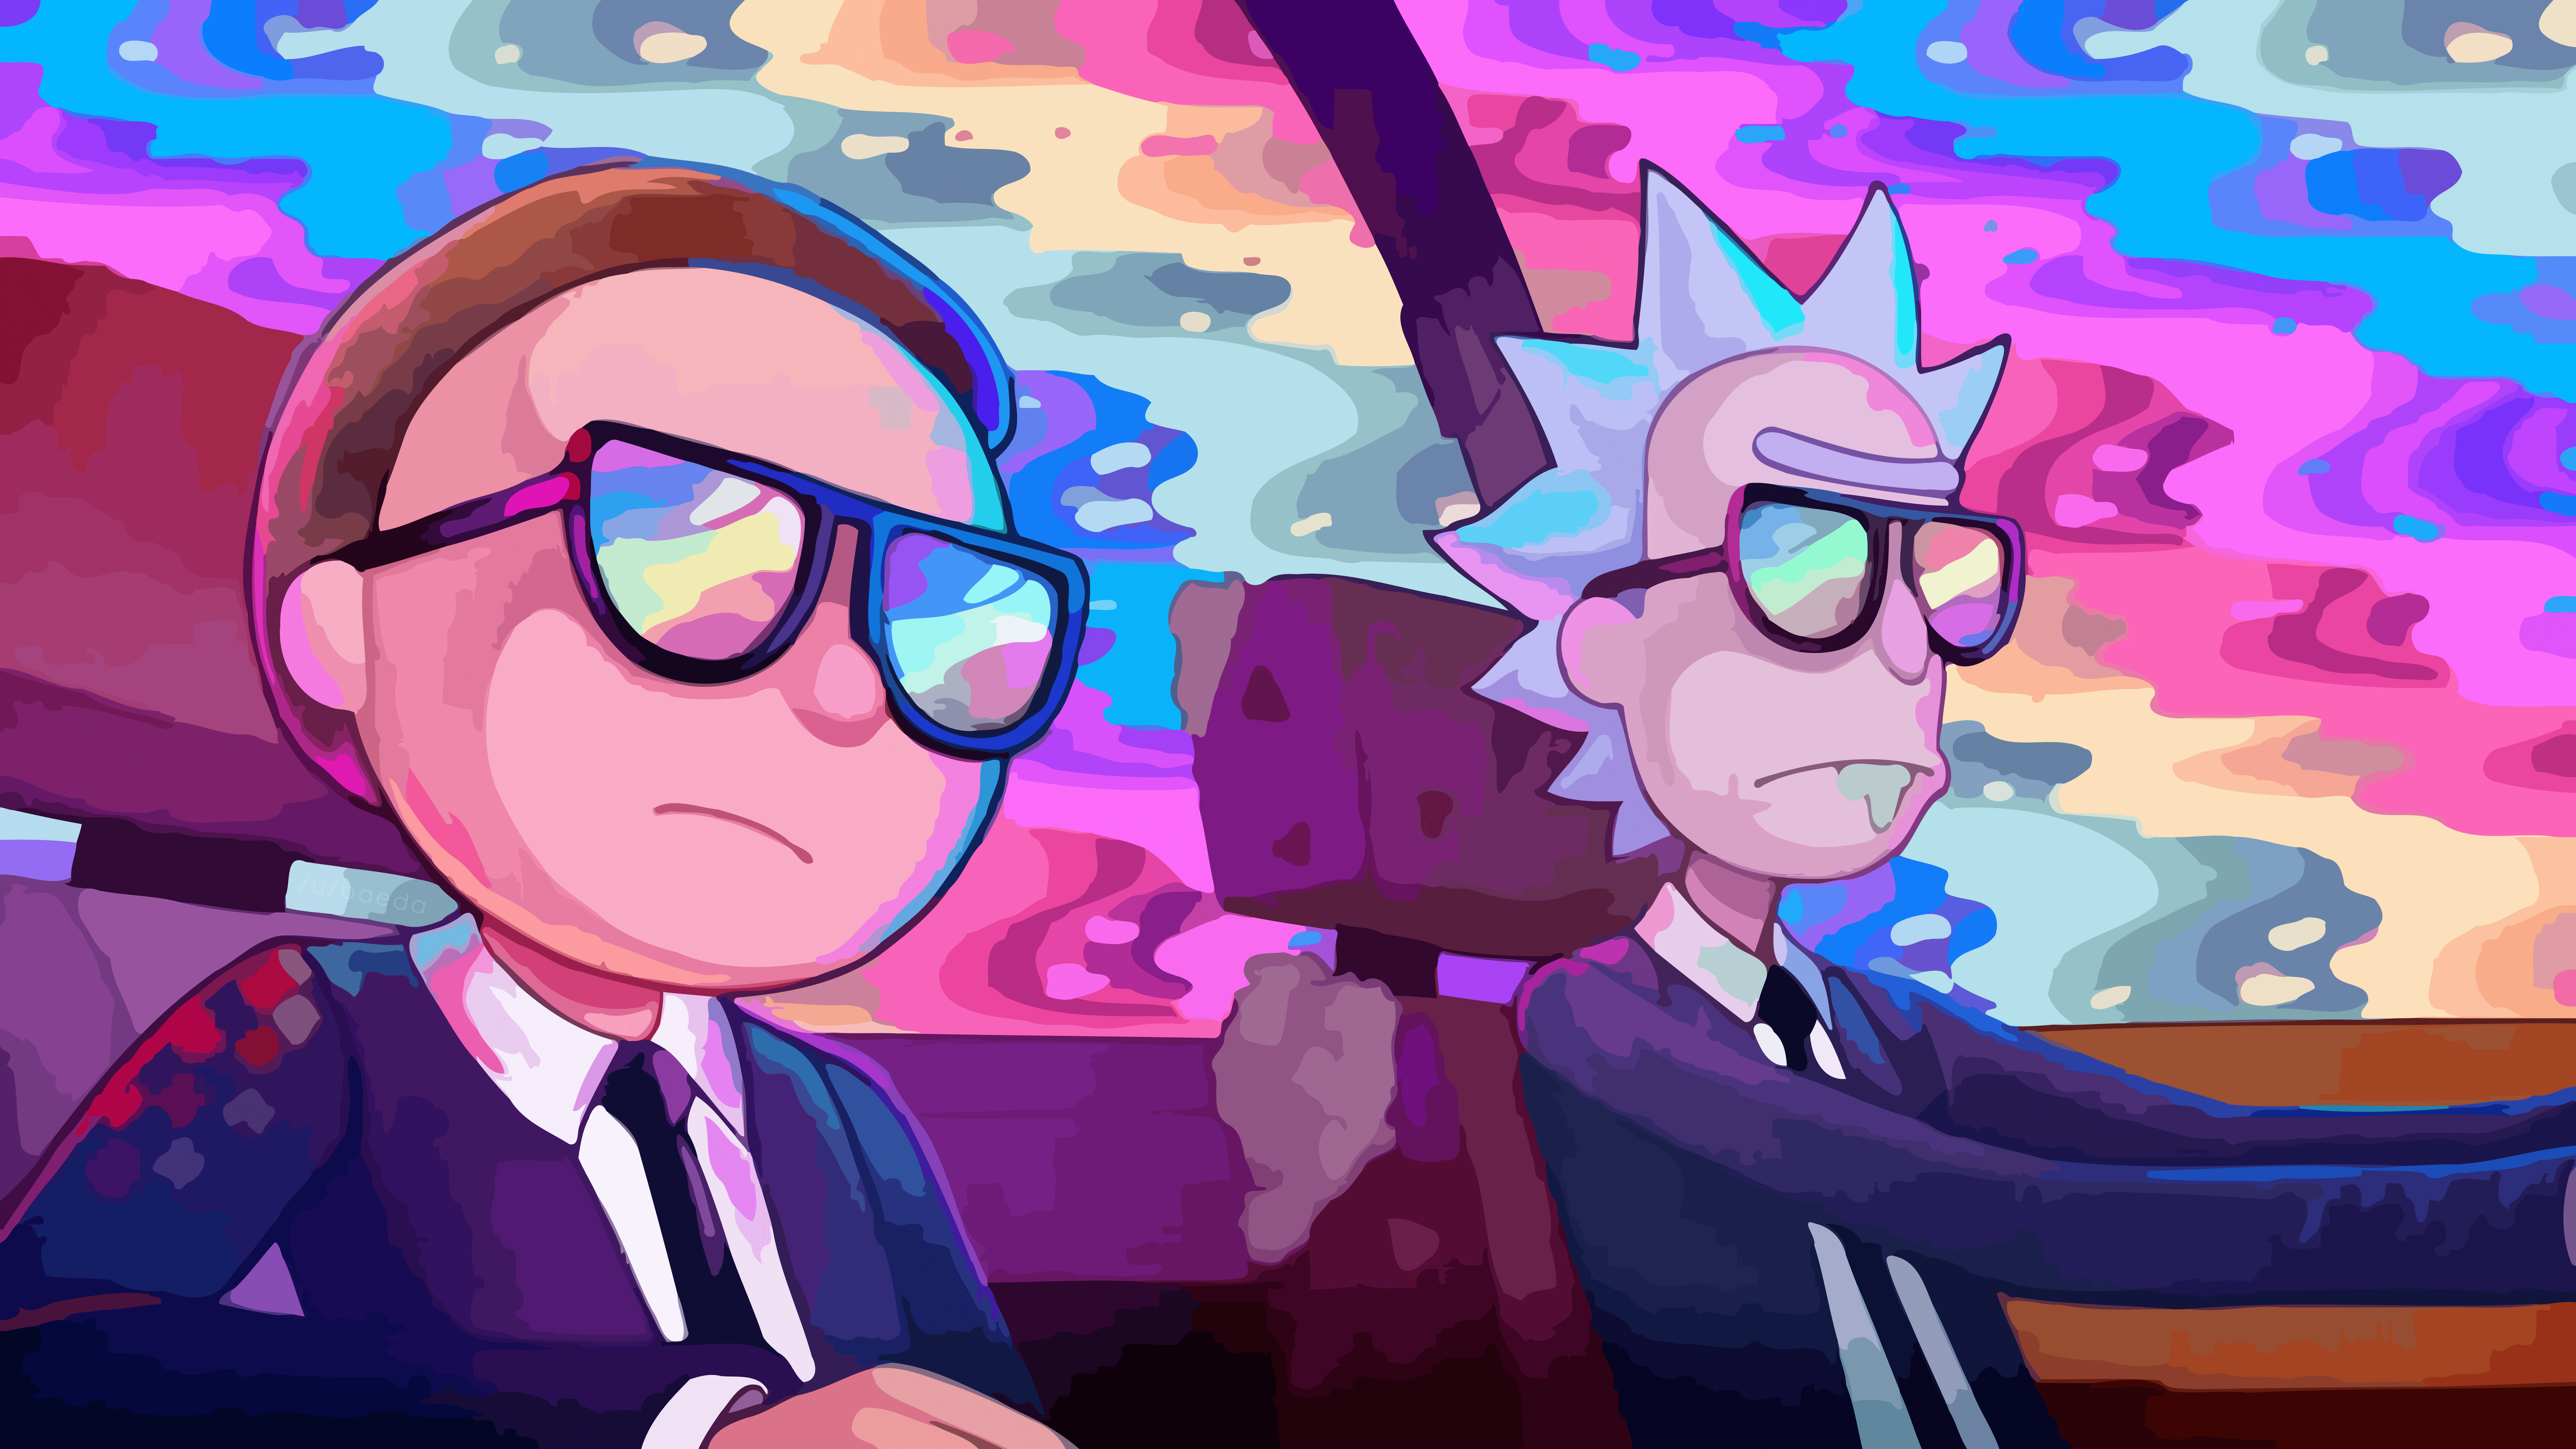 Wallpaper, Rick and Morty, Run for Jewels, vector graphics, car